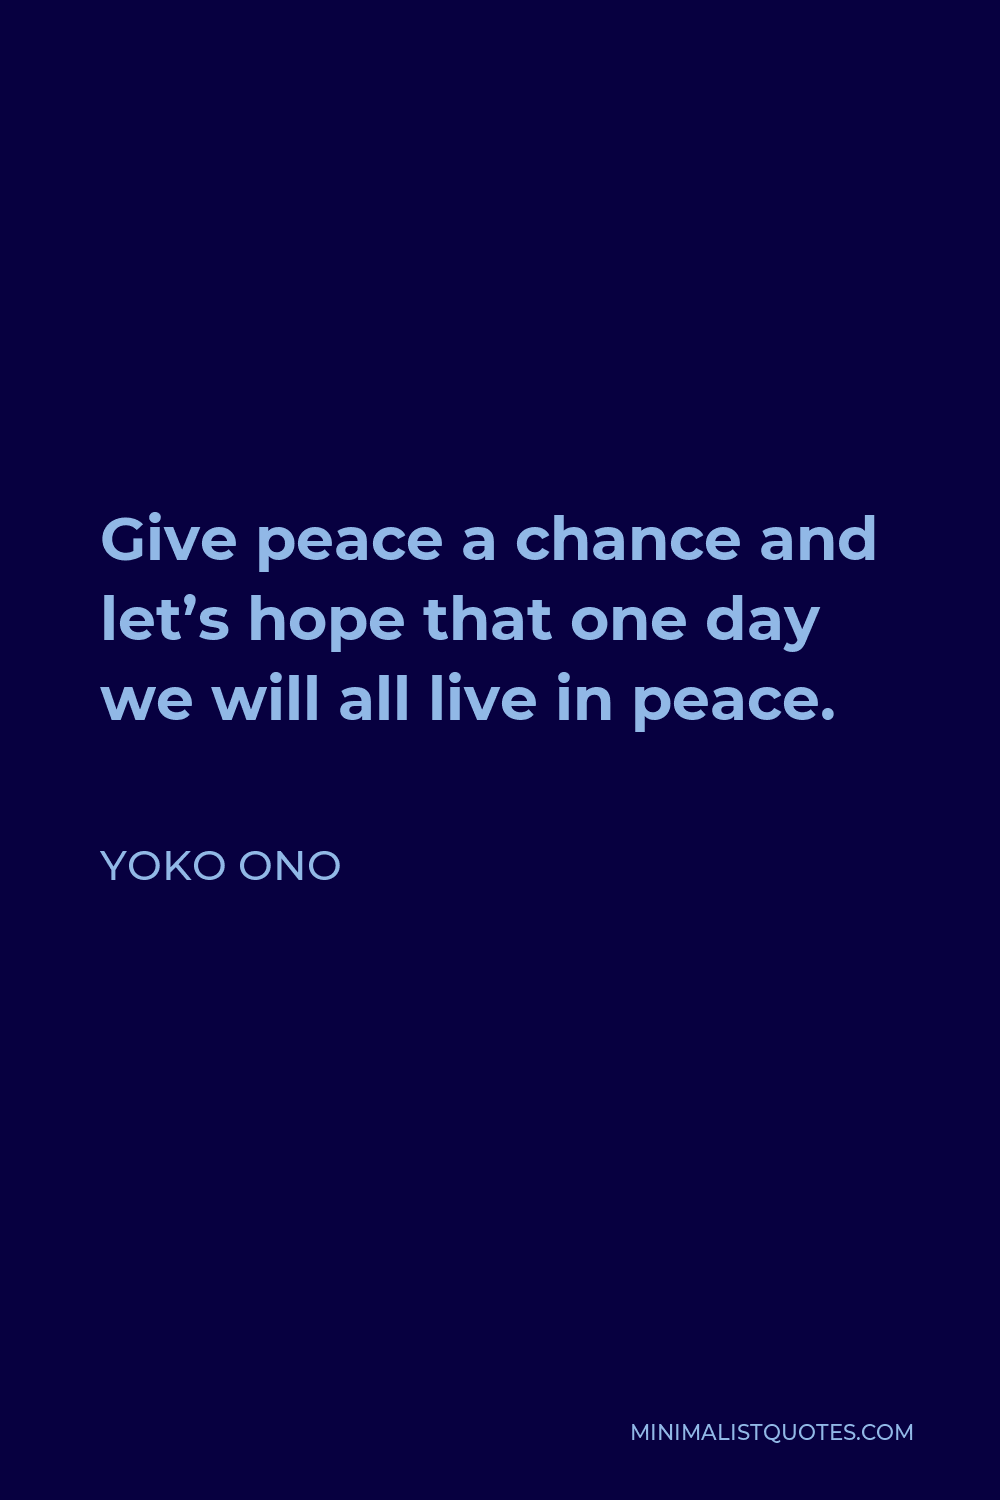 Yoko Ono Quote - Give peace a chance and let’s hope that one day we will all live in peace.